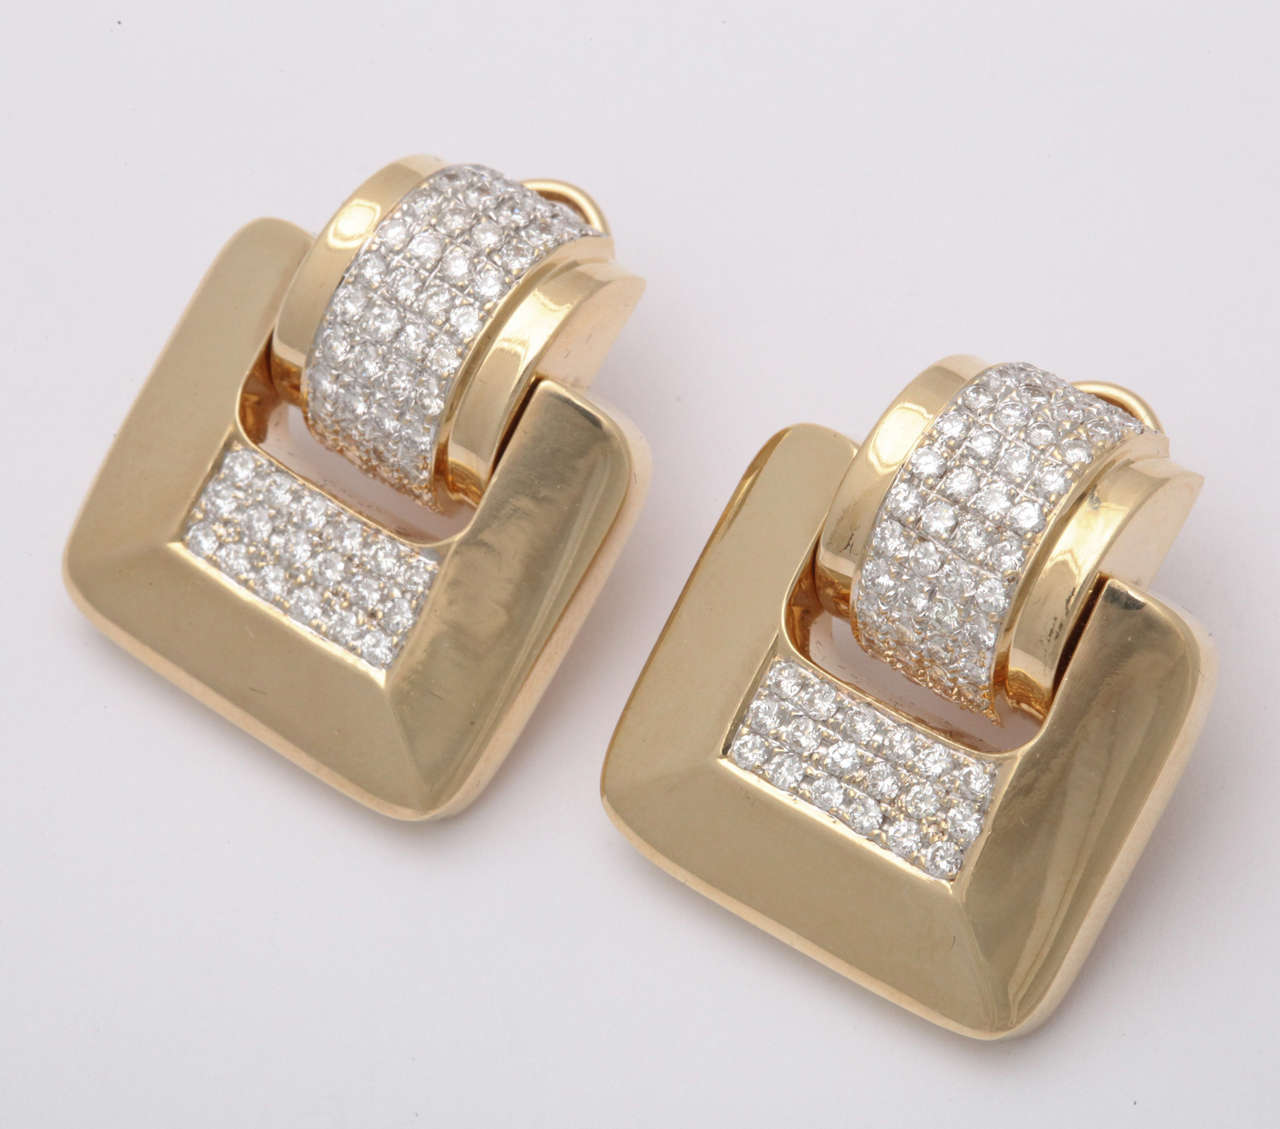 14kt Yellow Gold Omega Back Earrings with Posts.  Set with clean, full cut white Diamonds.  Earrings are moveable &  sway as you move.  Ca 1980.
Approximately 3 carats